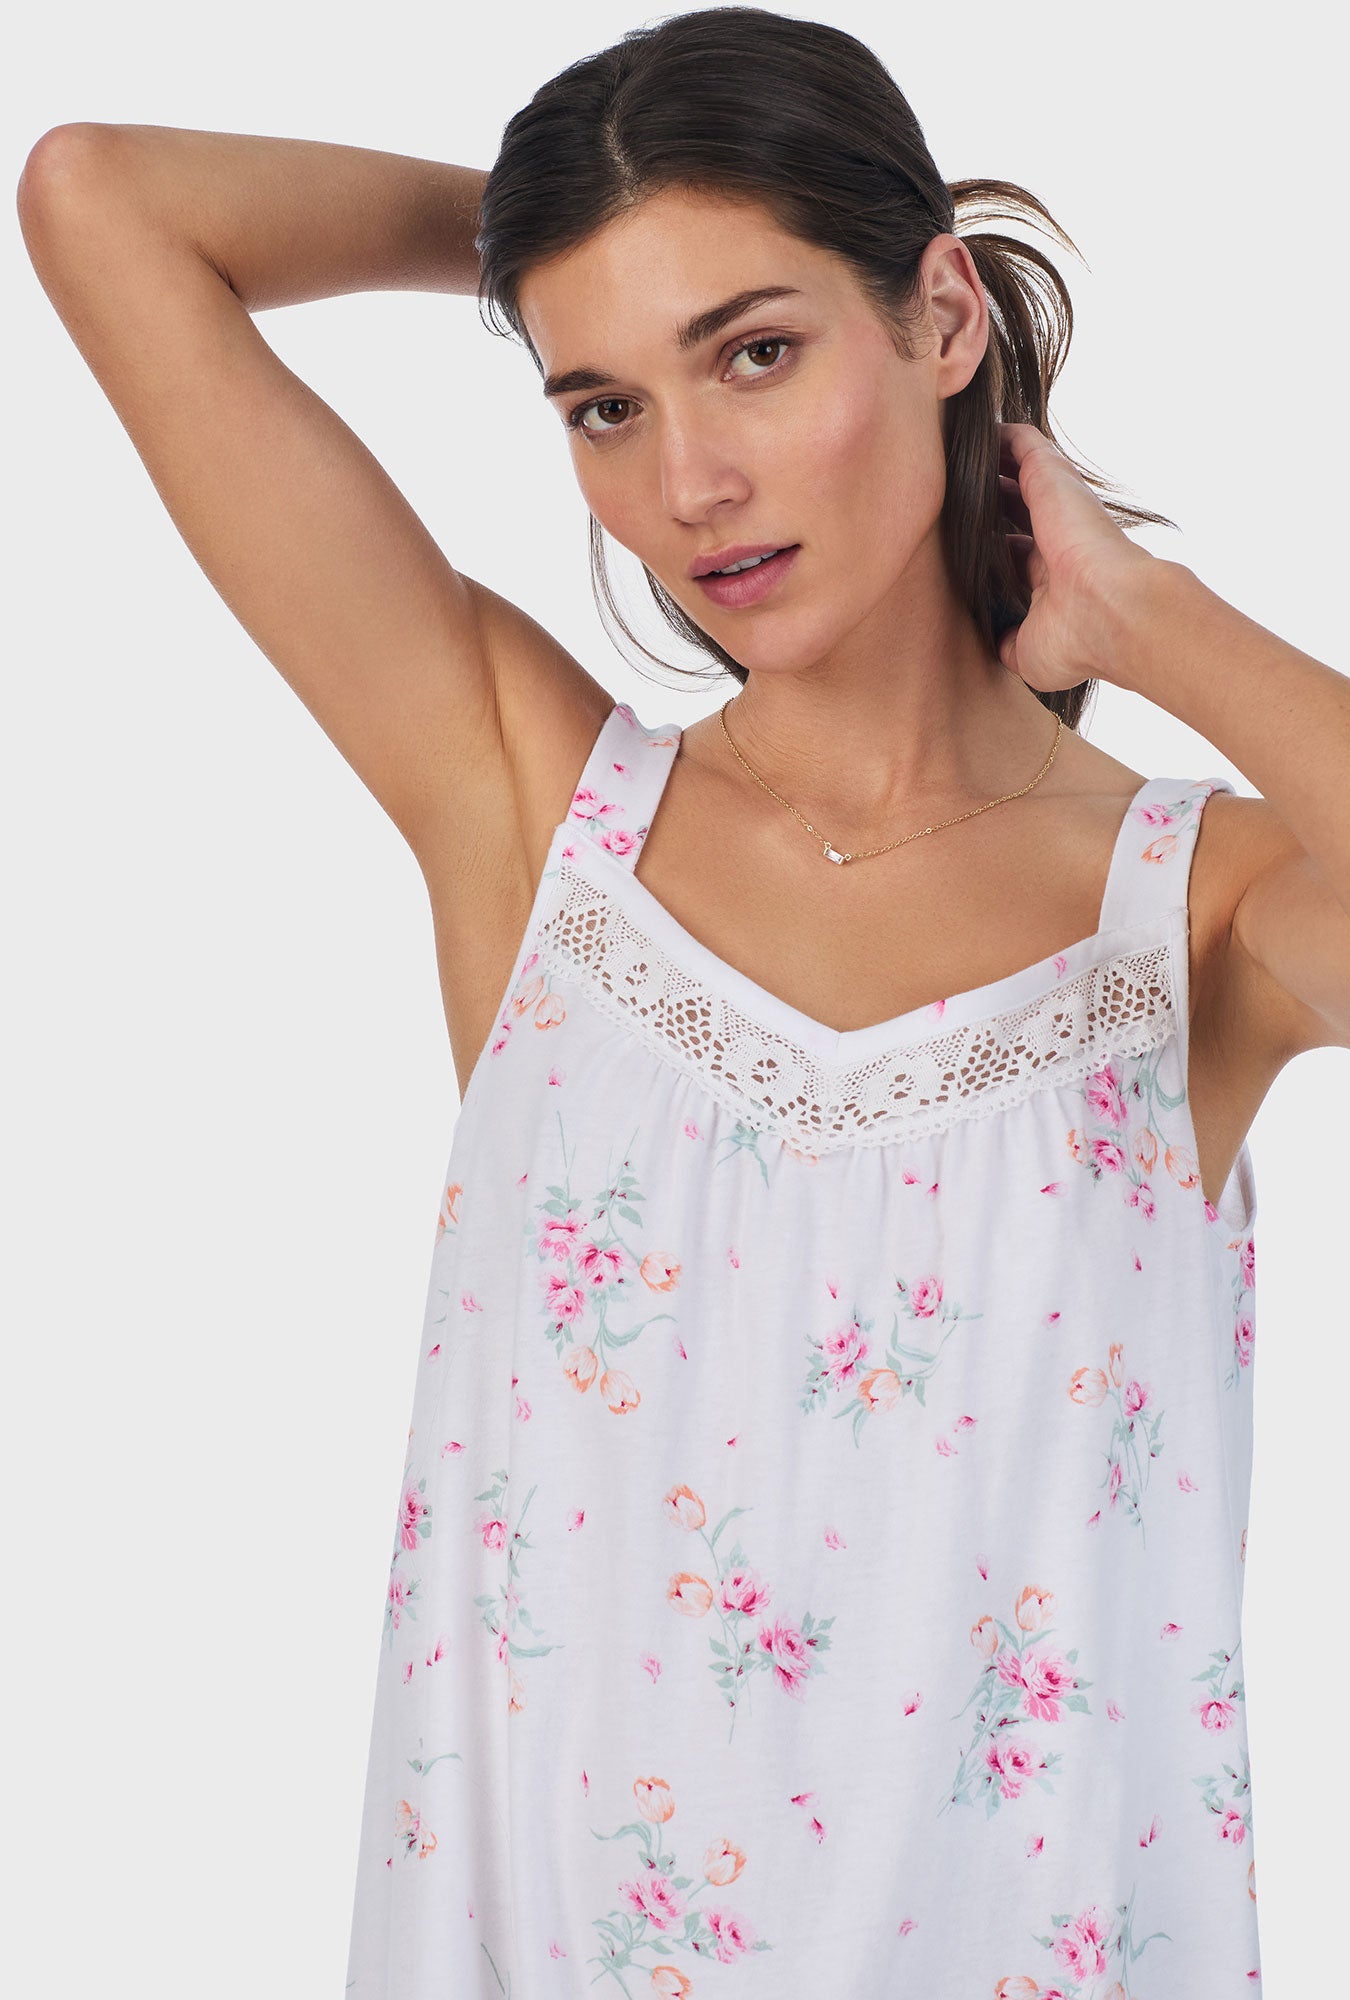 A lady wearing pink sleeveless cotton ballet nightgown with floral bouquet print.